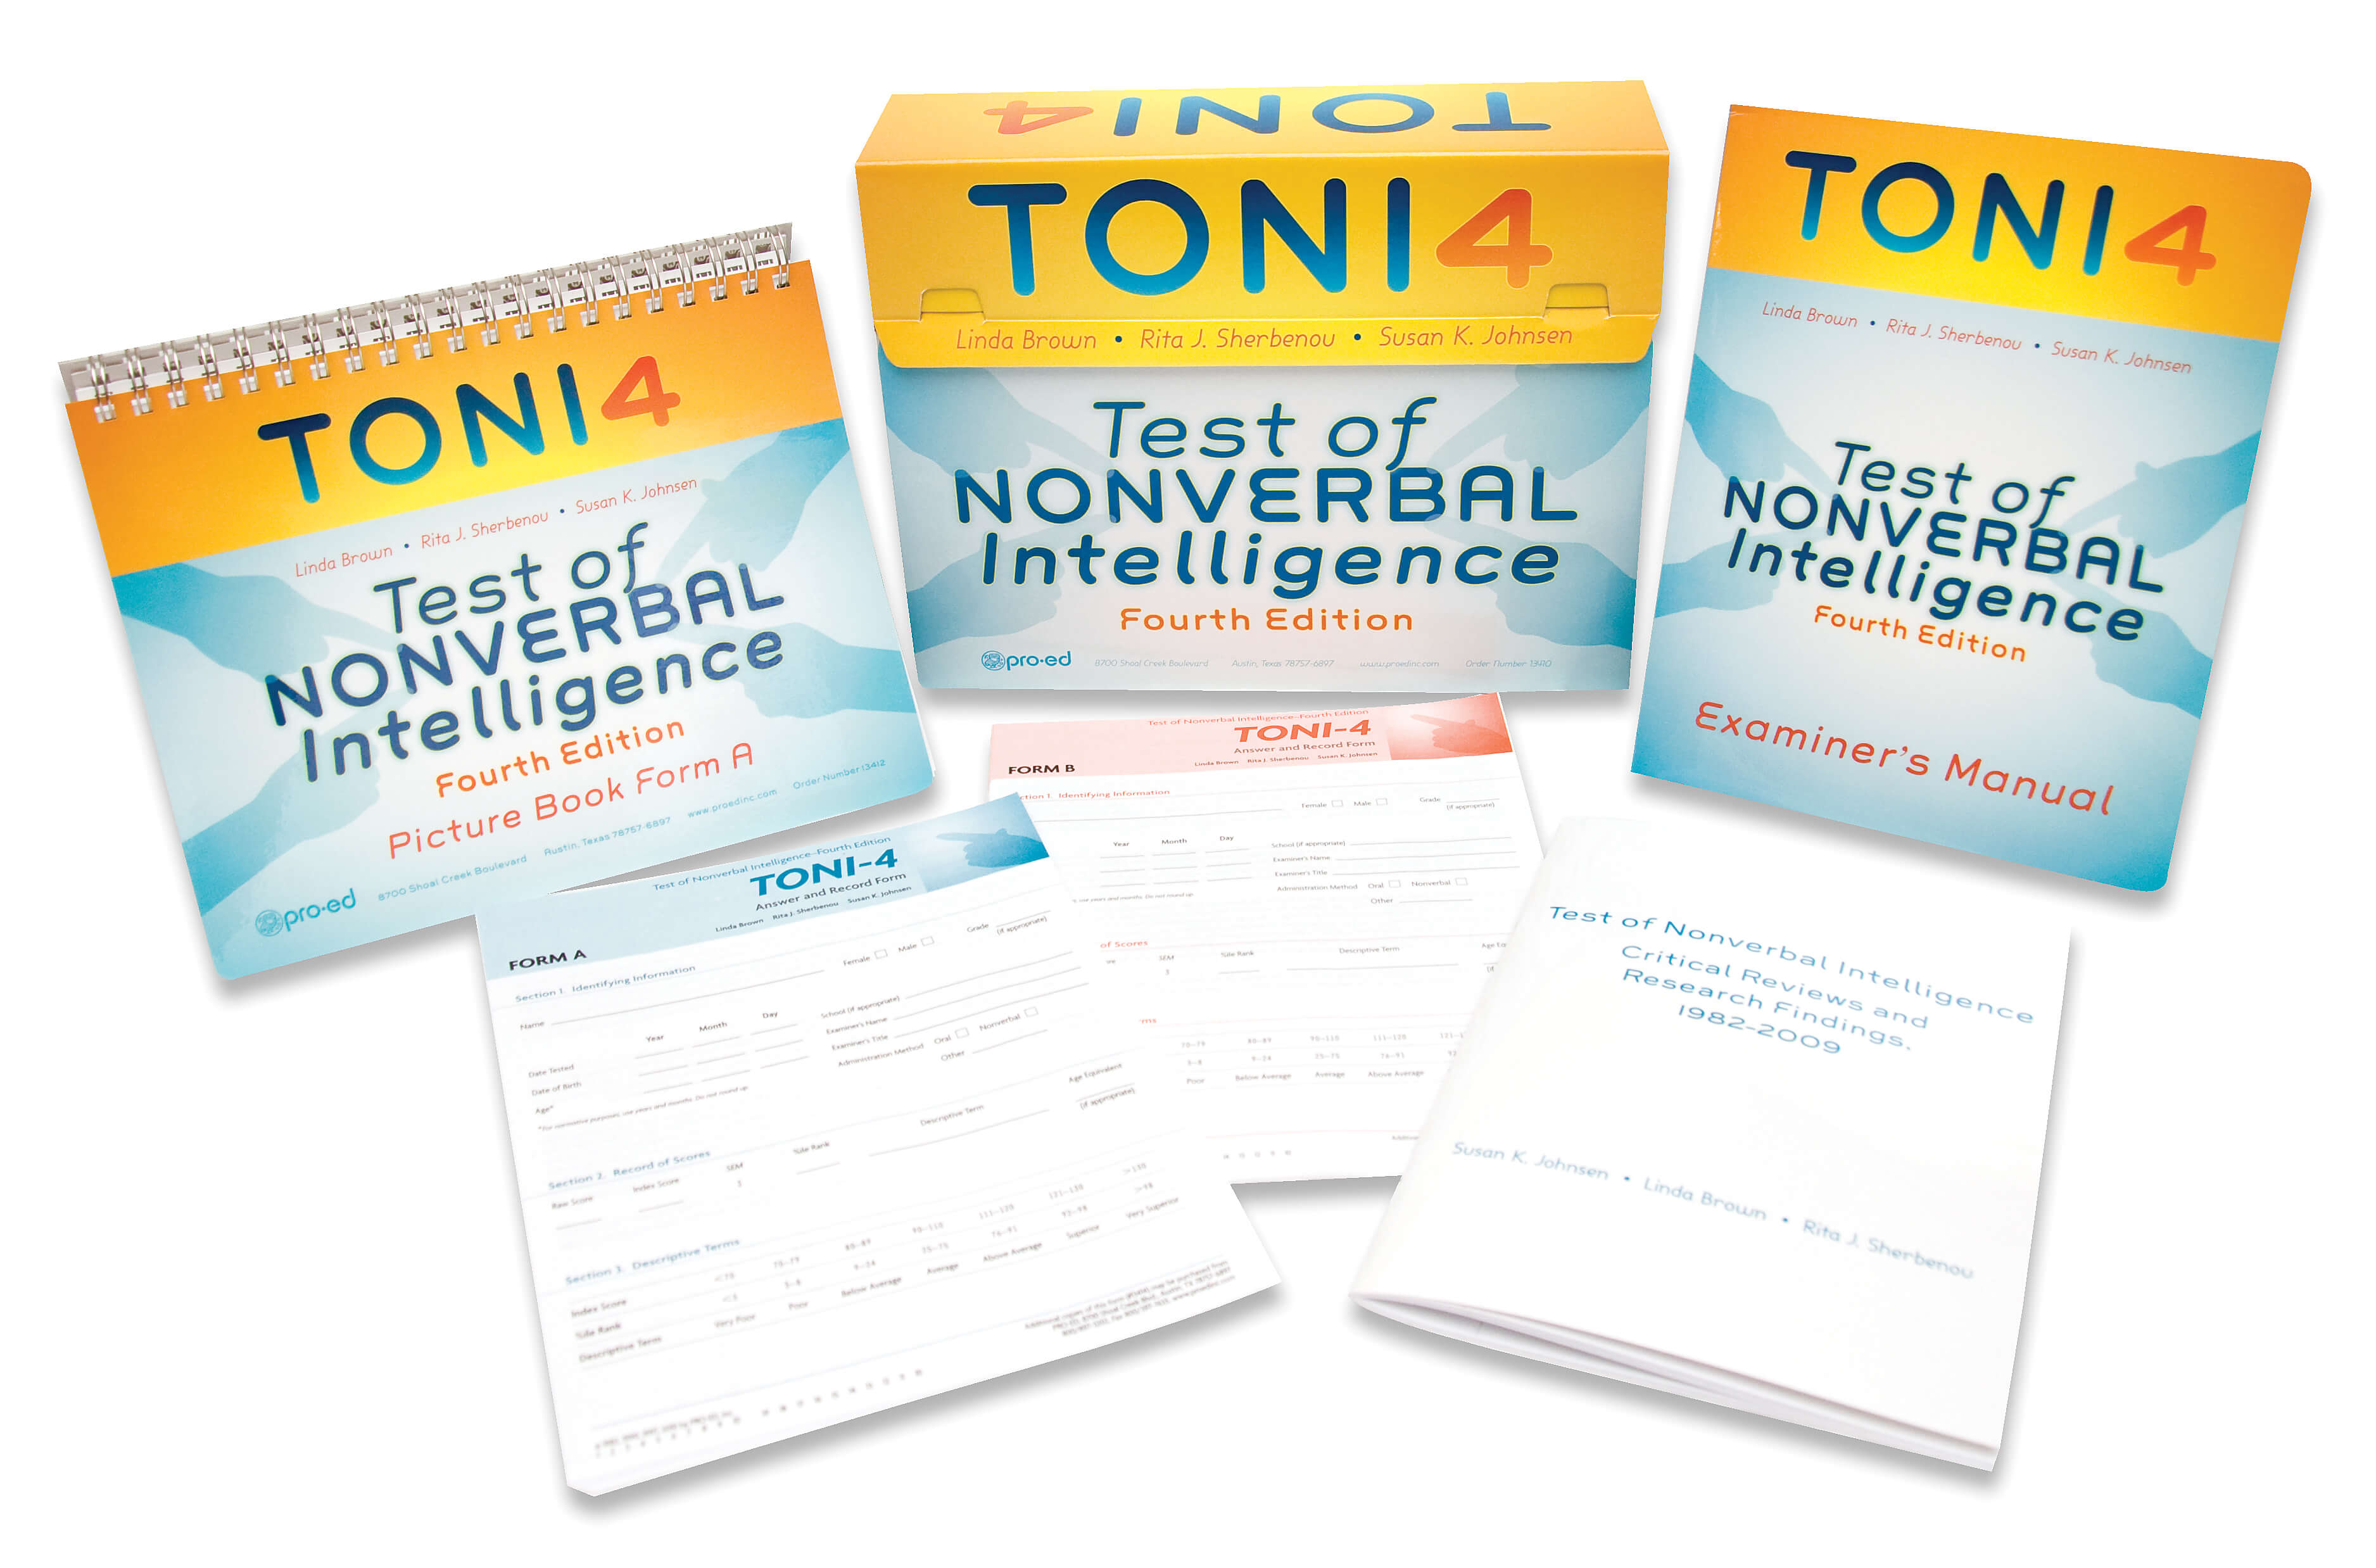 TONI–4: Test of Nonverbal Intelligence 4th Edition - 